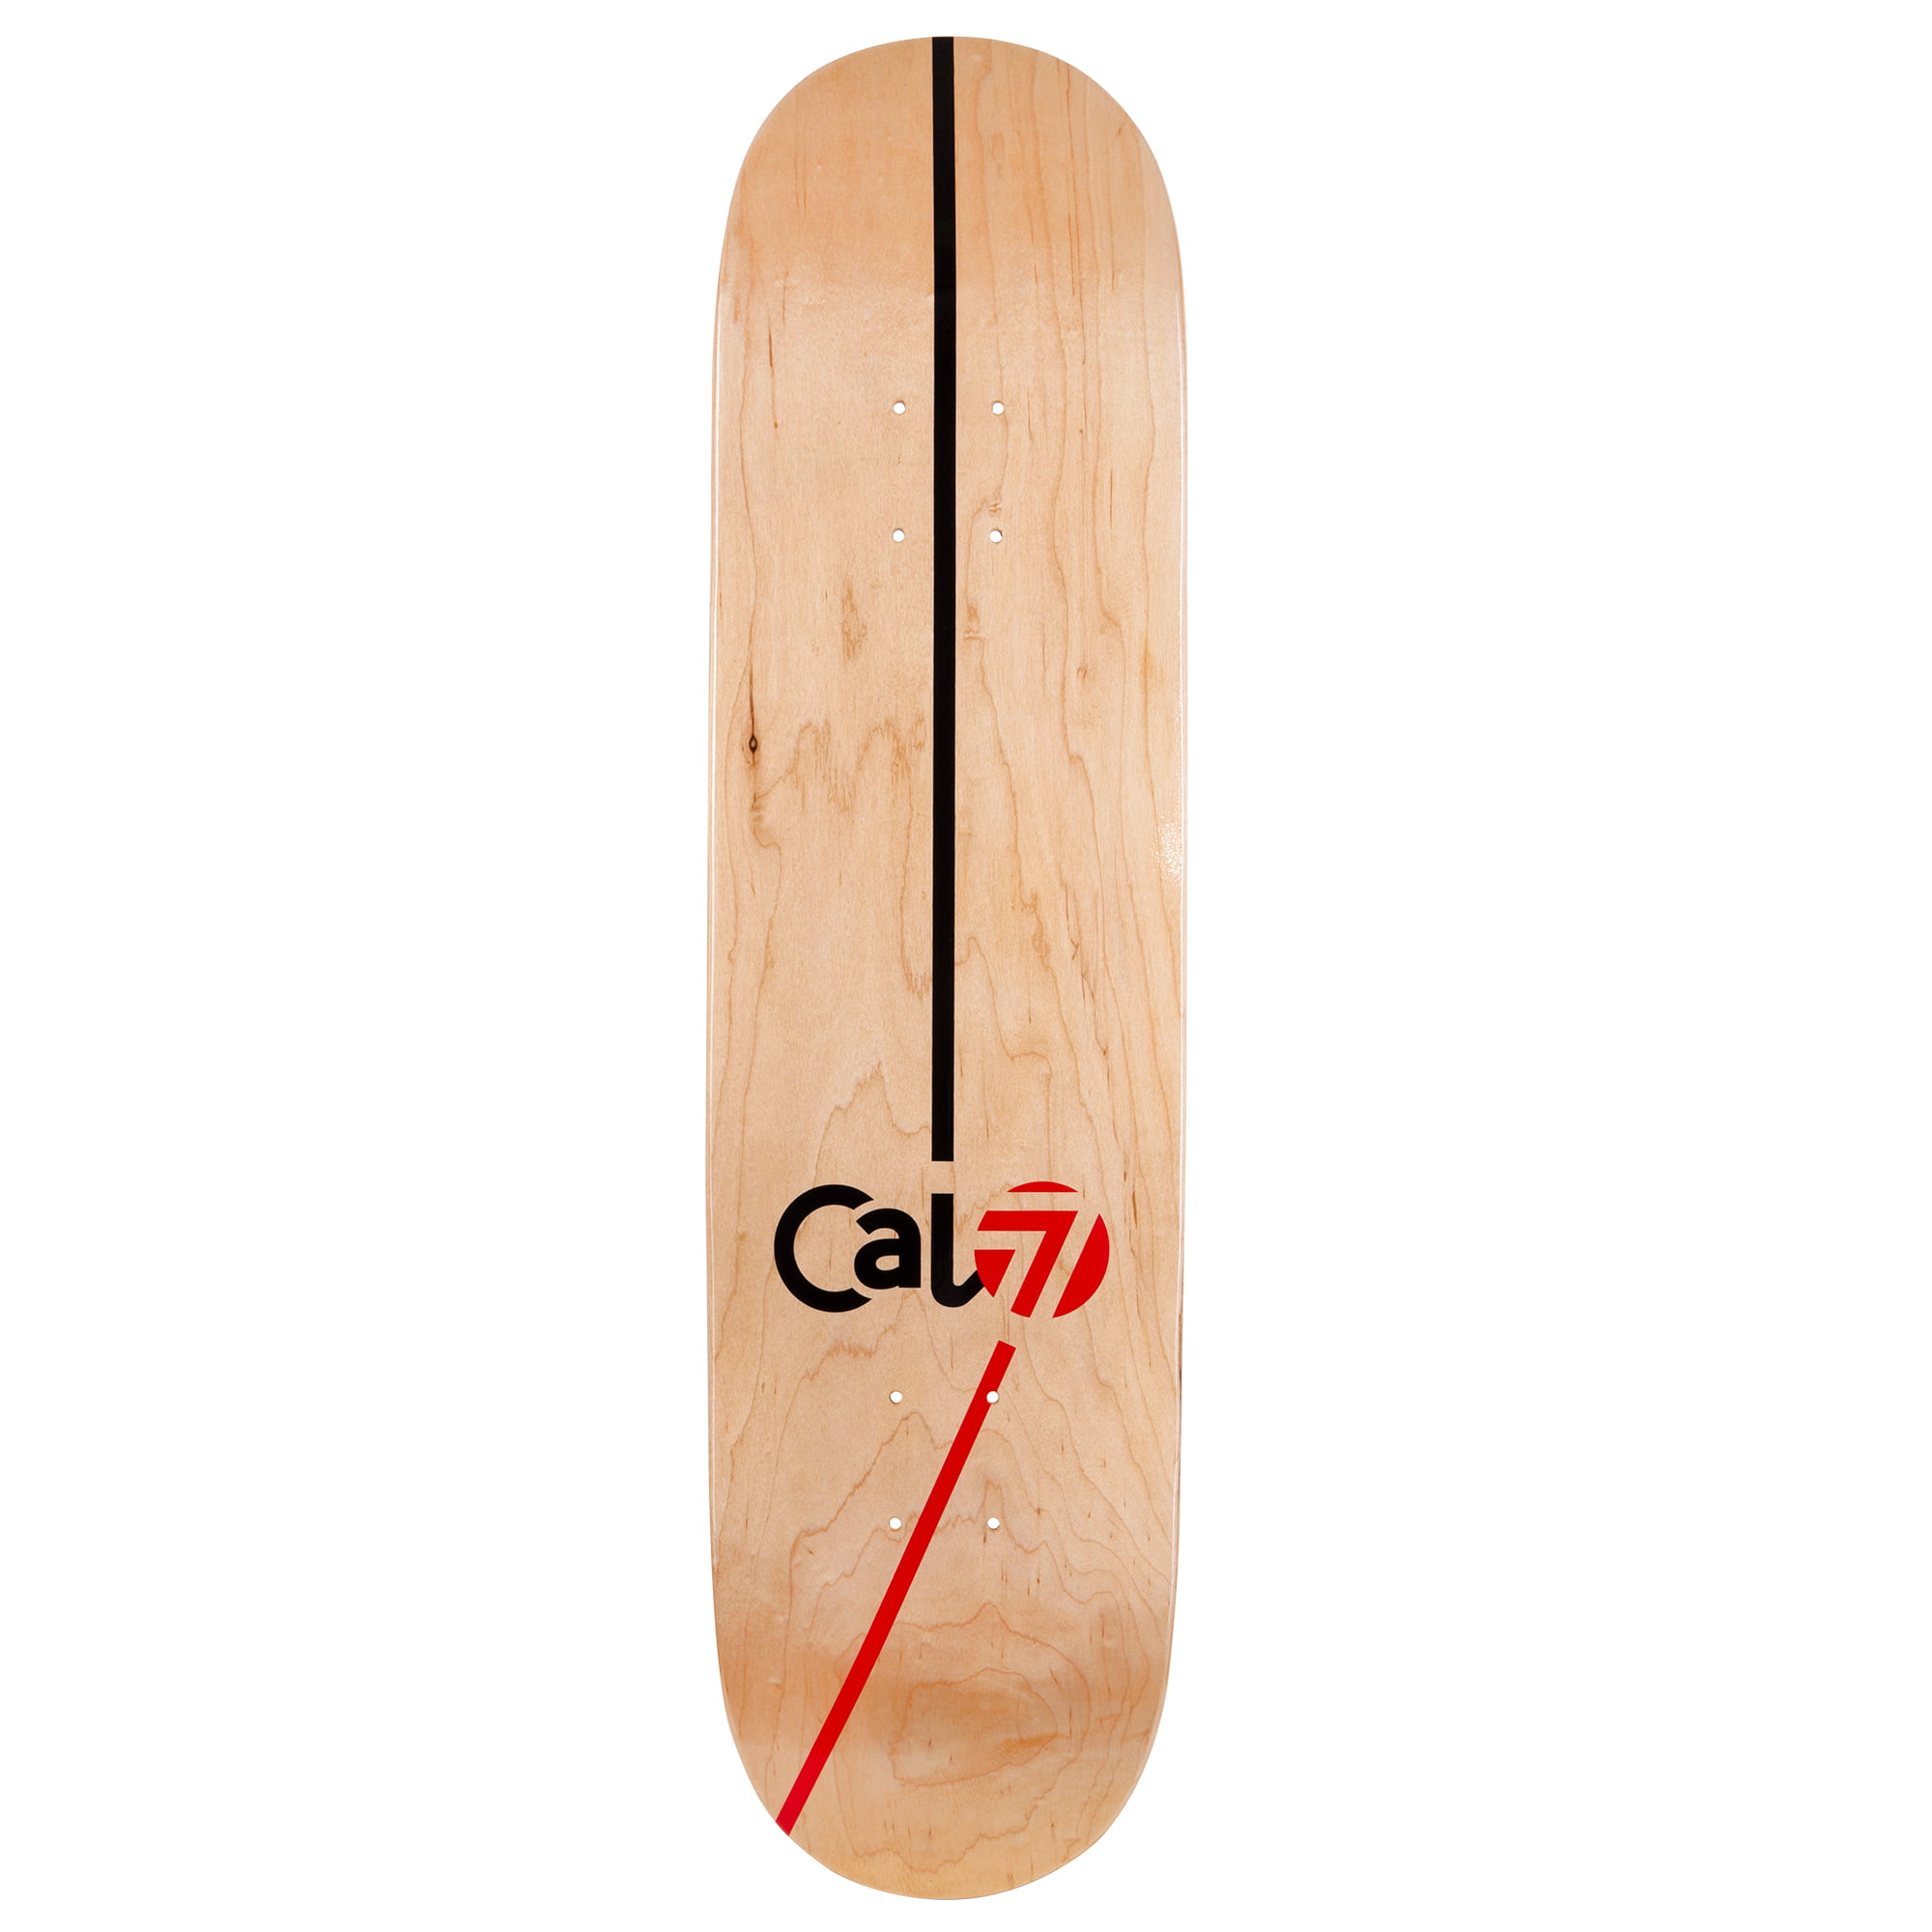 8 8.25 Maple Board for Skating 7.75 and 8.5 Inch Cal 7 Natural Skateboard Deck with Graphic Grip Tape